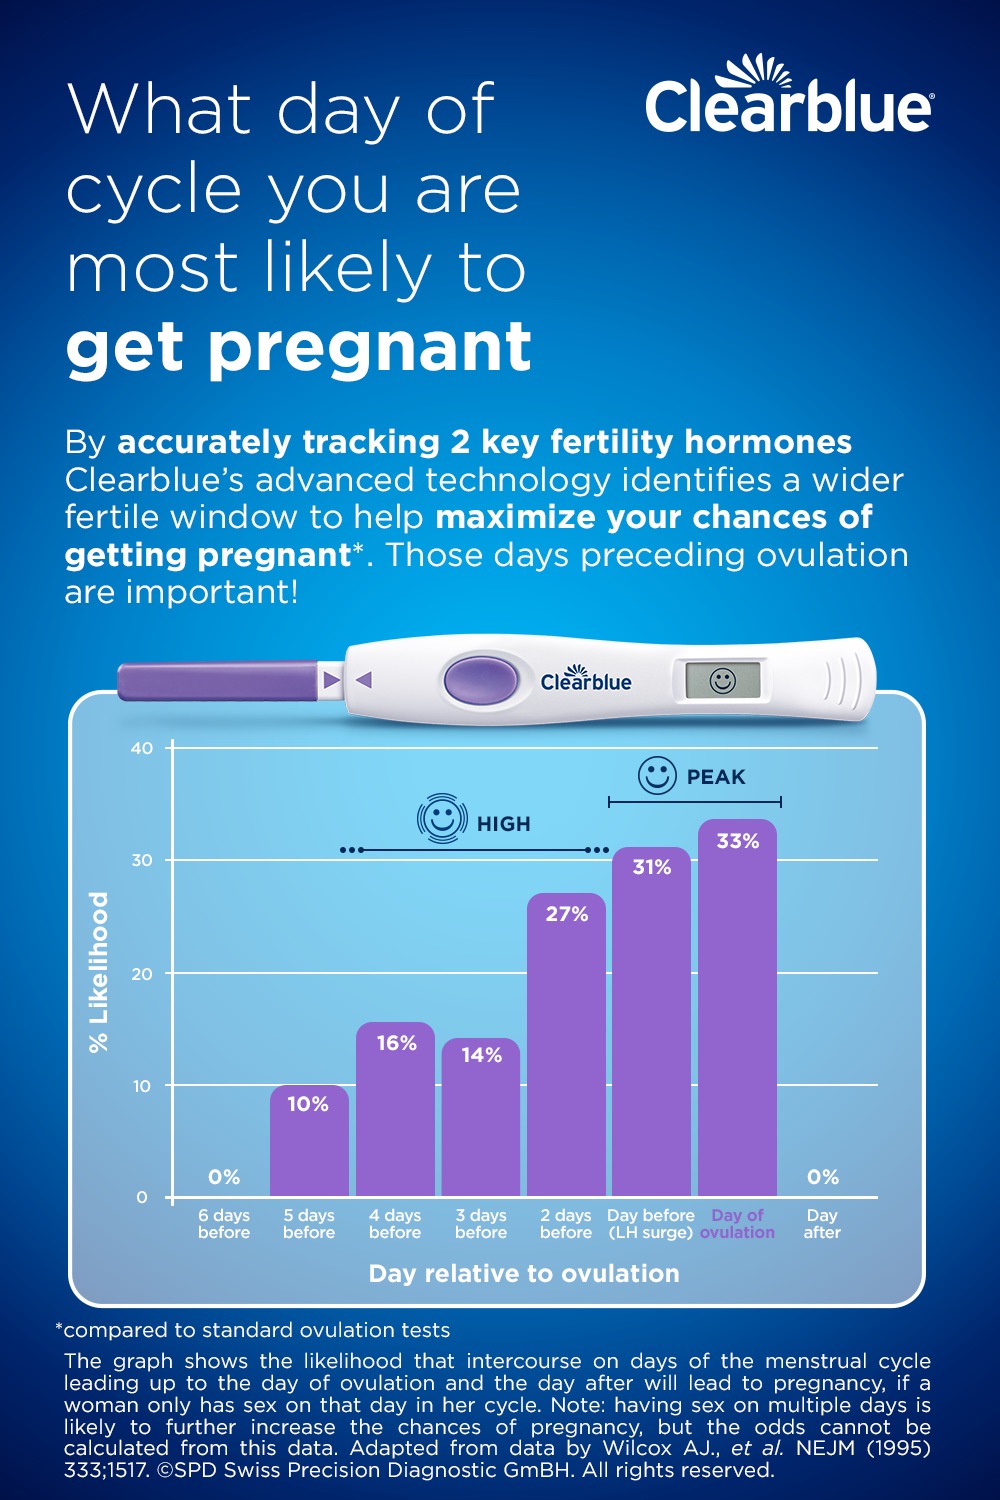 When are you most fertile?